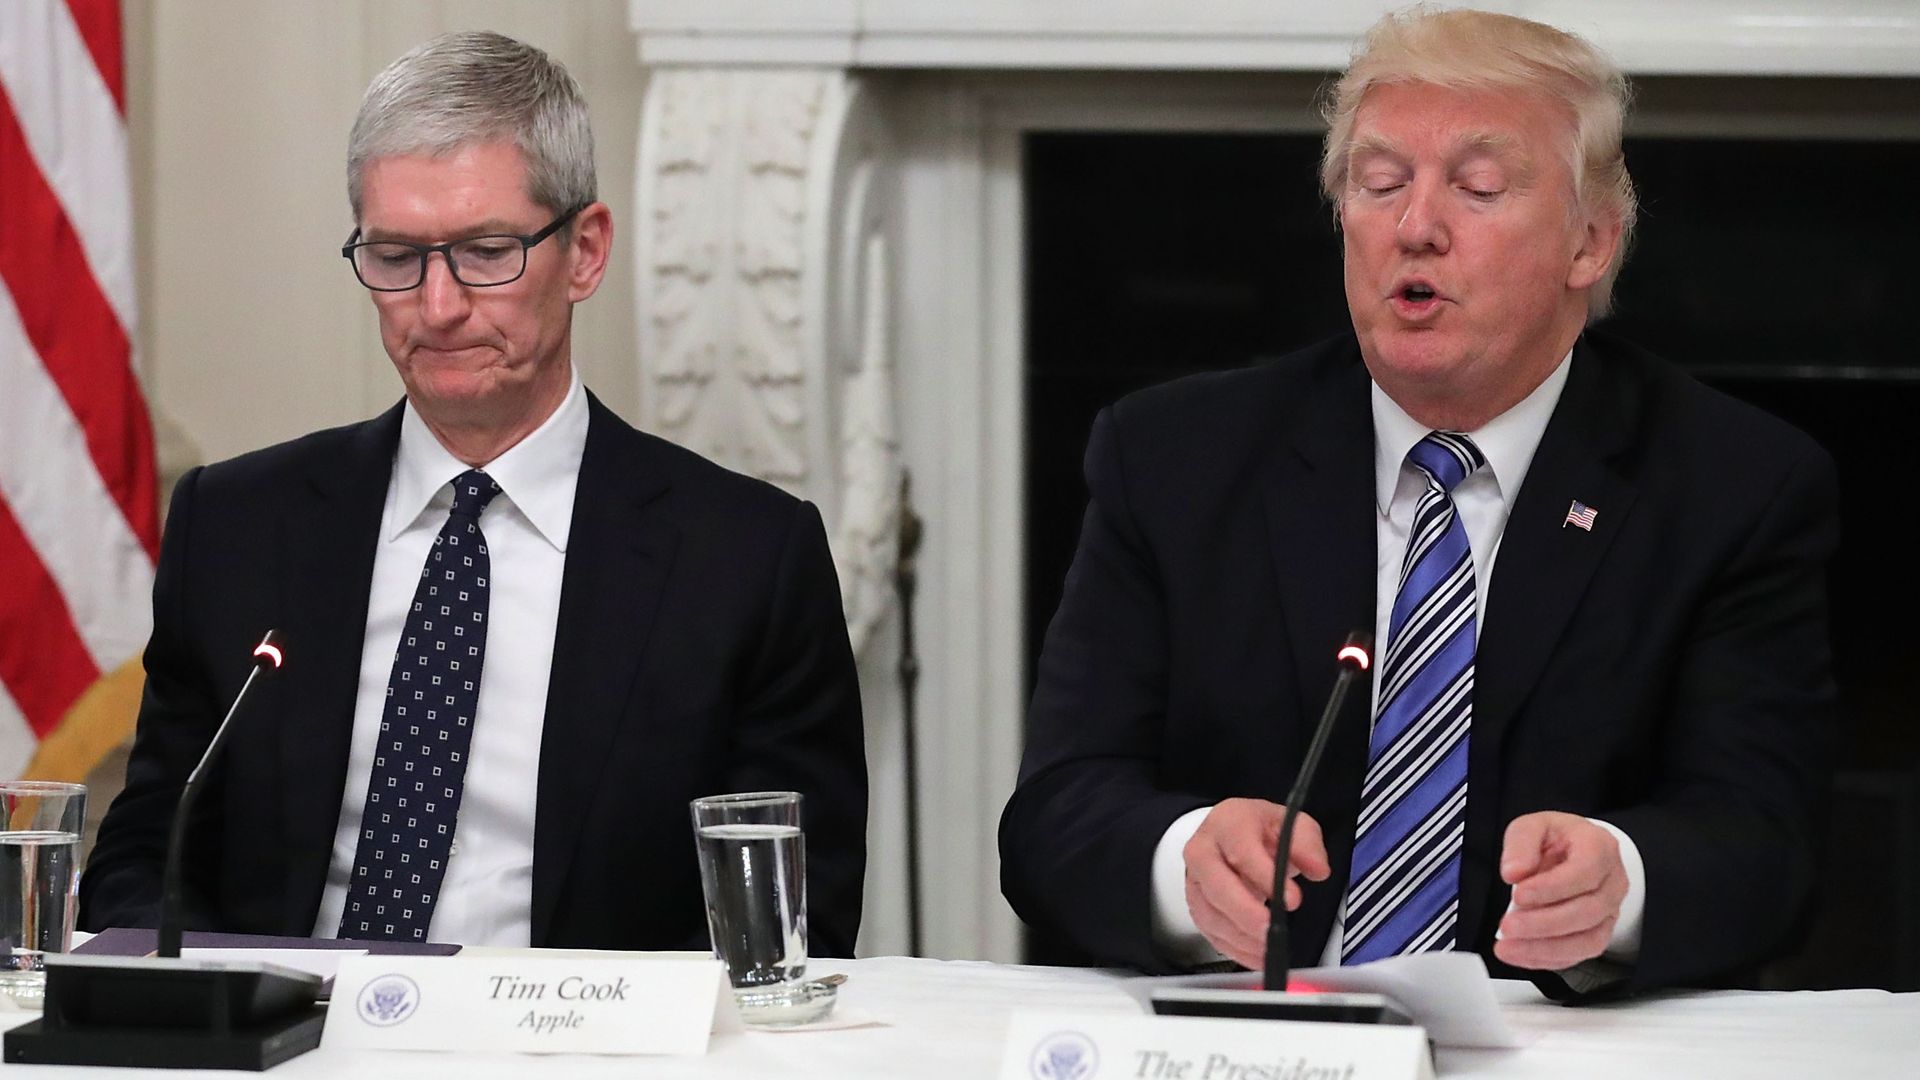 Apple CEO Tim Cook in a 2017 meeting at the White House with President Trump.